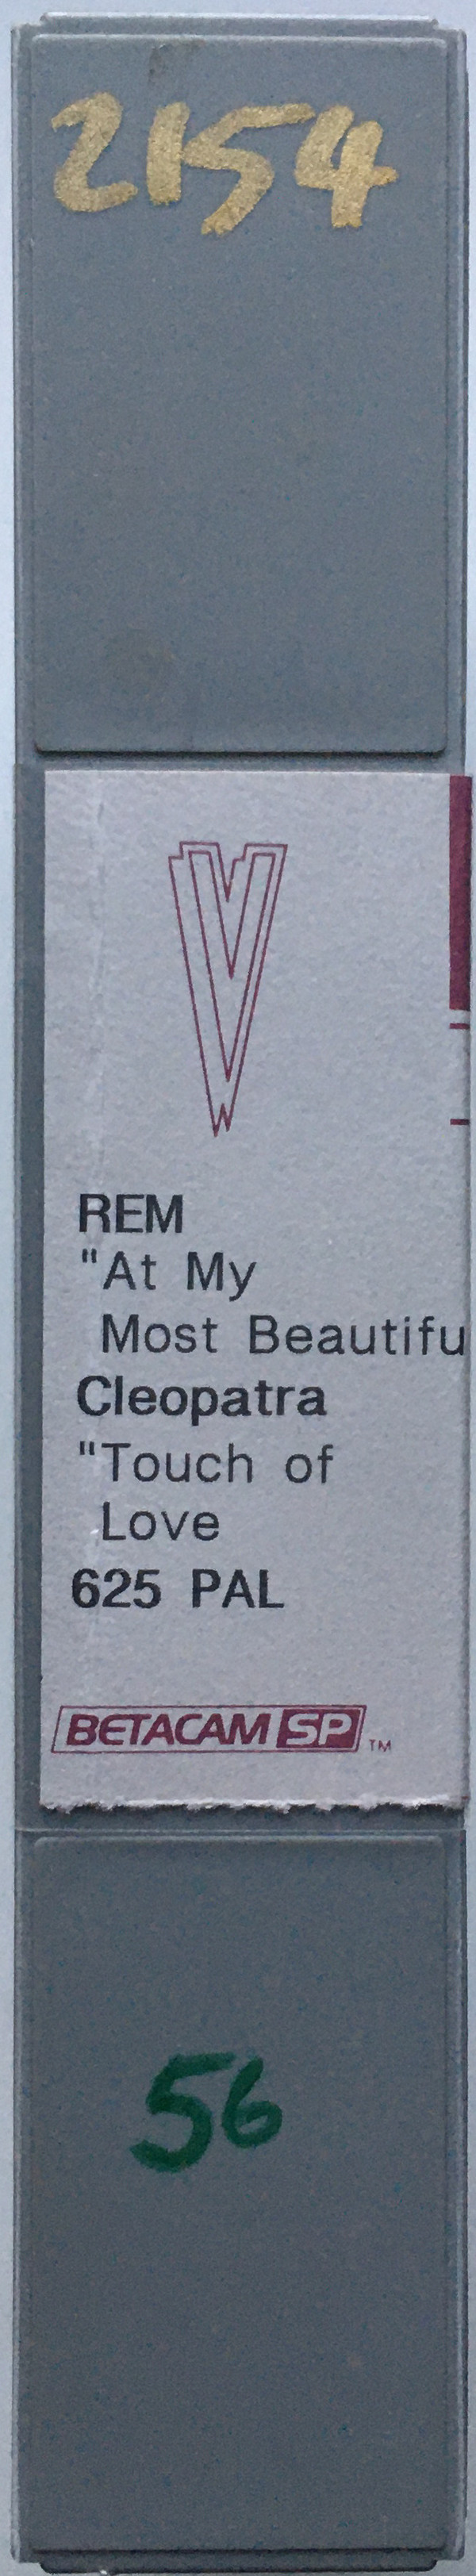 ladda ner album REM Cleopatra - At My Most Beautiful Touch Of Love